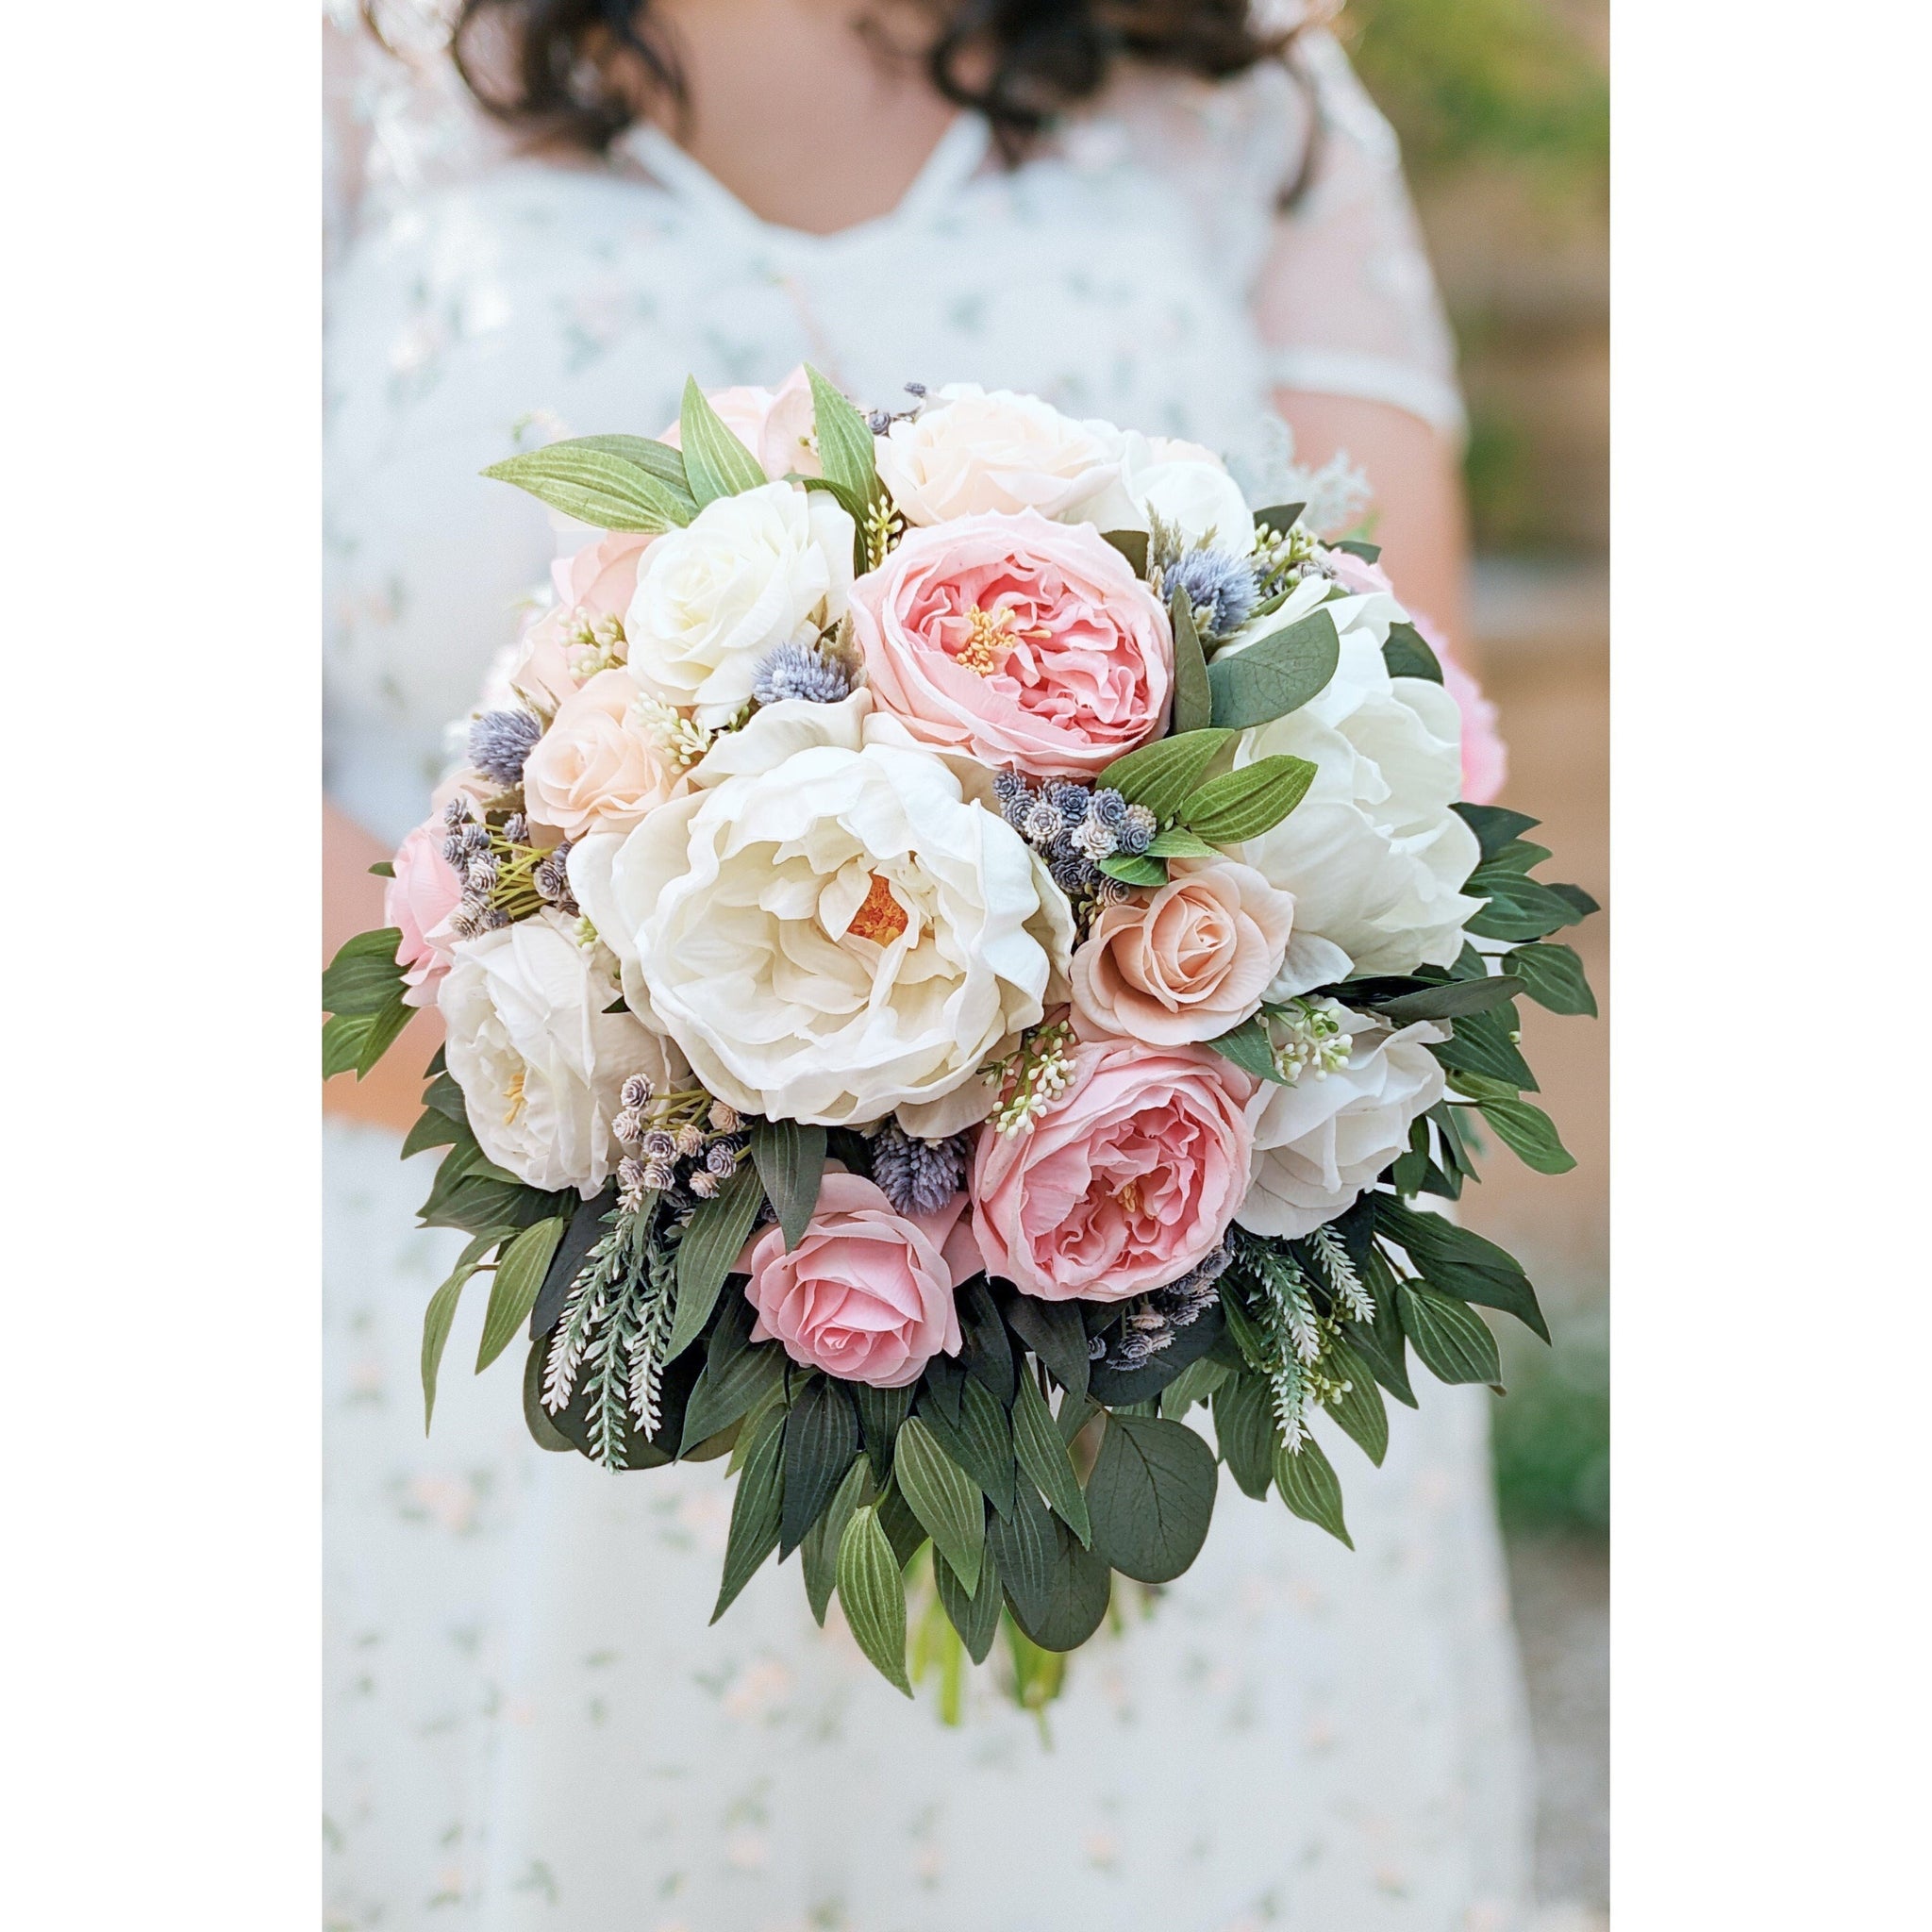 Cascade Bridal Bouquet Pink Peach Dusty Blue Real Touch Garden Roses Peonies Eucalyptus - Add Boutonniere Bridesmaid Corsage & More!